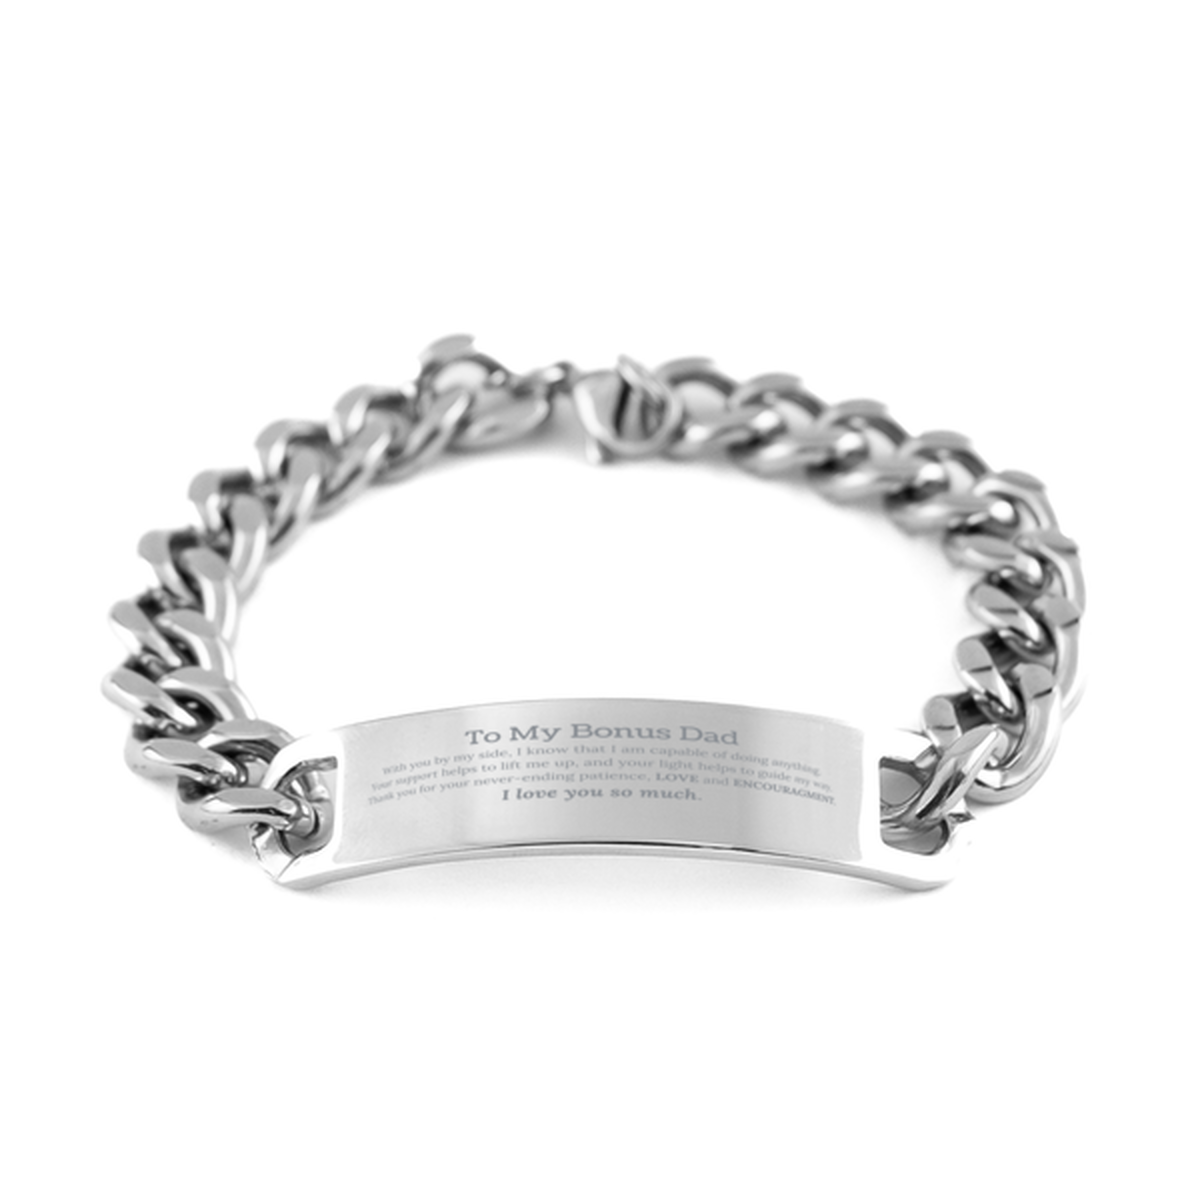 Appreciation Bonus Dad Cuban Chain Stainless Steel Bracelet Gifts, To My Bonus Dad Birthday Christmas Wedding Keepsake Gifts for Bonus Dad With you by my side, I know that I am capable of doing anything. I love you so much